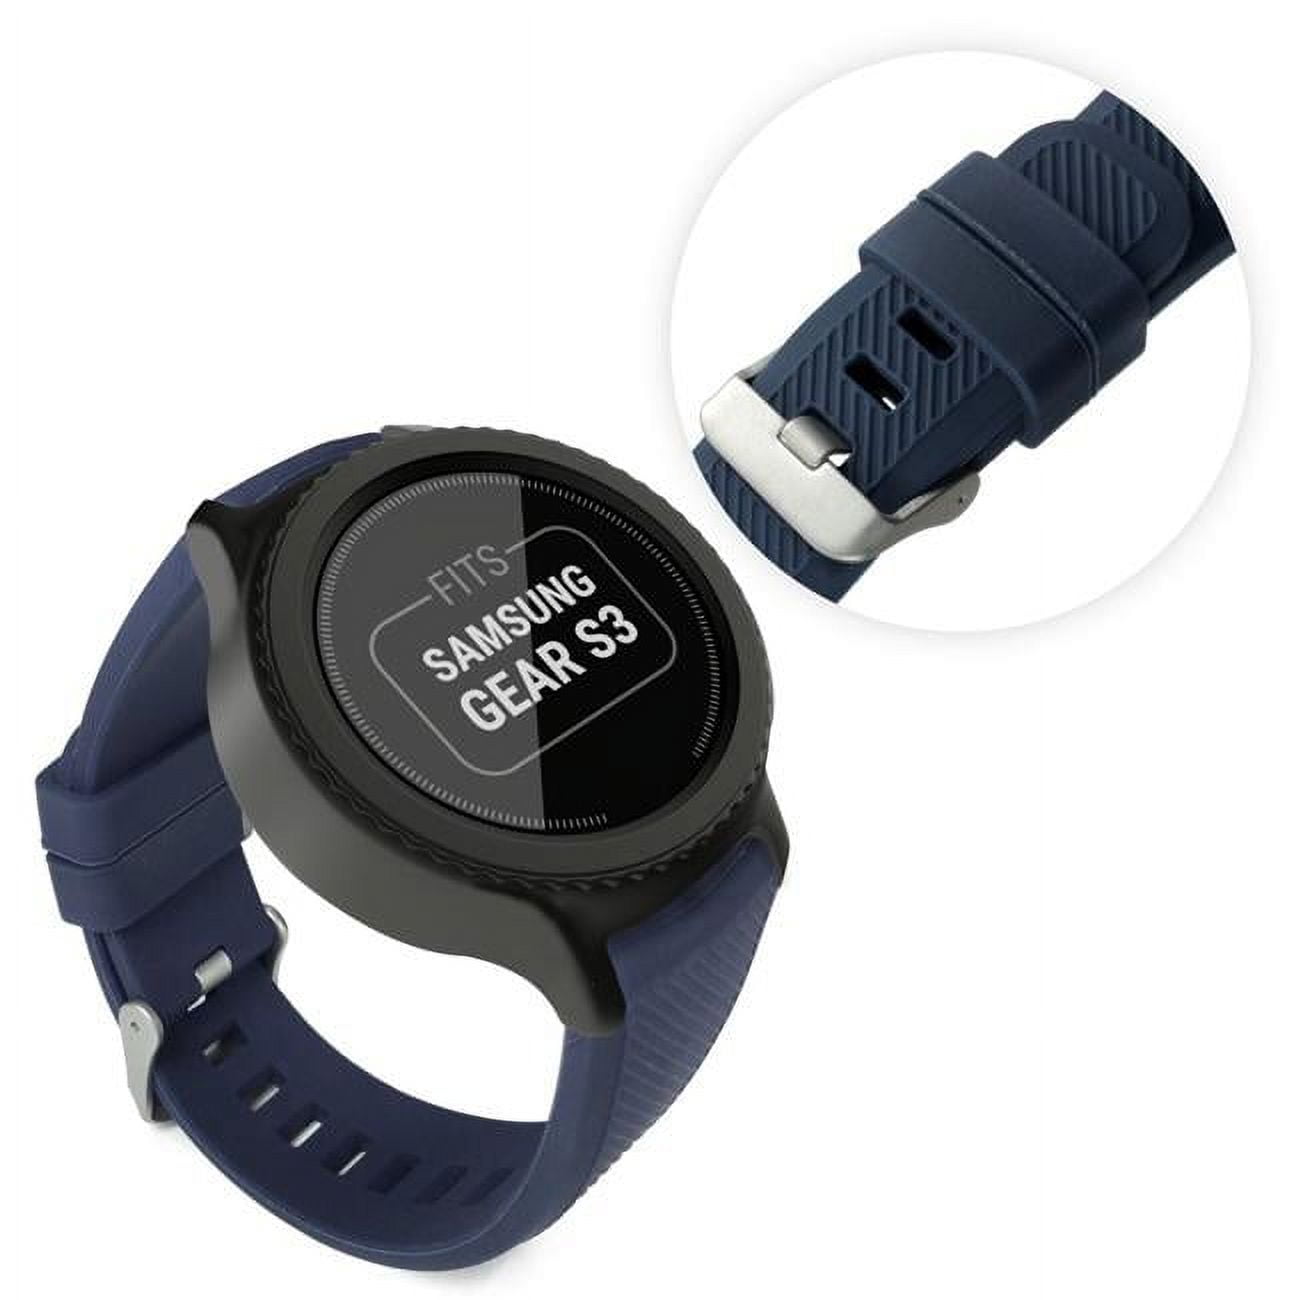 Tuff Luv G4-102 Silicone Wrist Watch Strap Band For Samsung - Navy Blue, Small